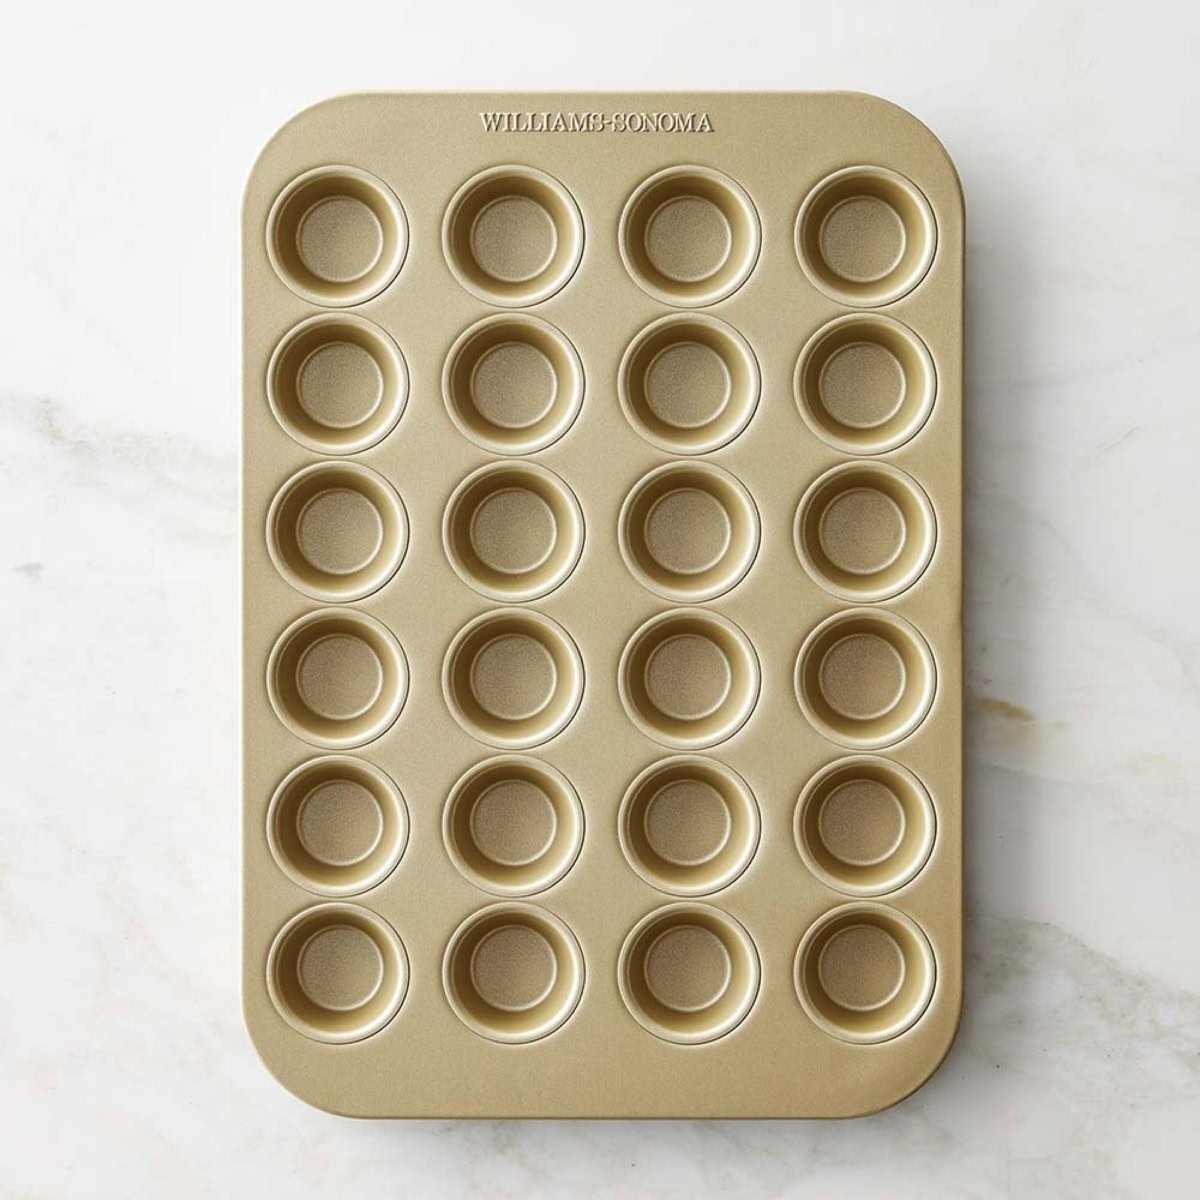 A goldtouch mini muffin pan on a marble surface